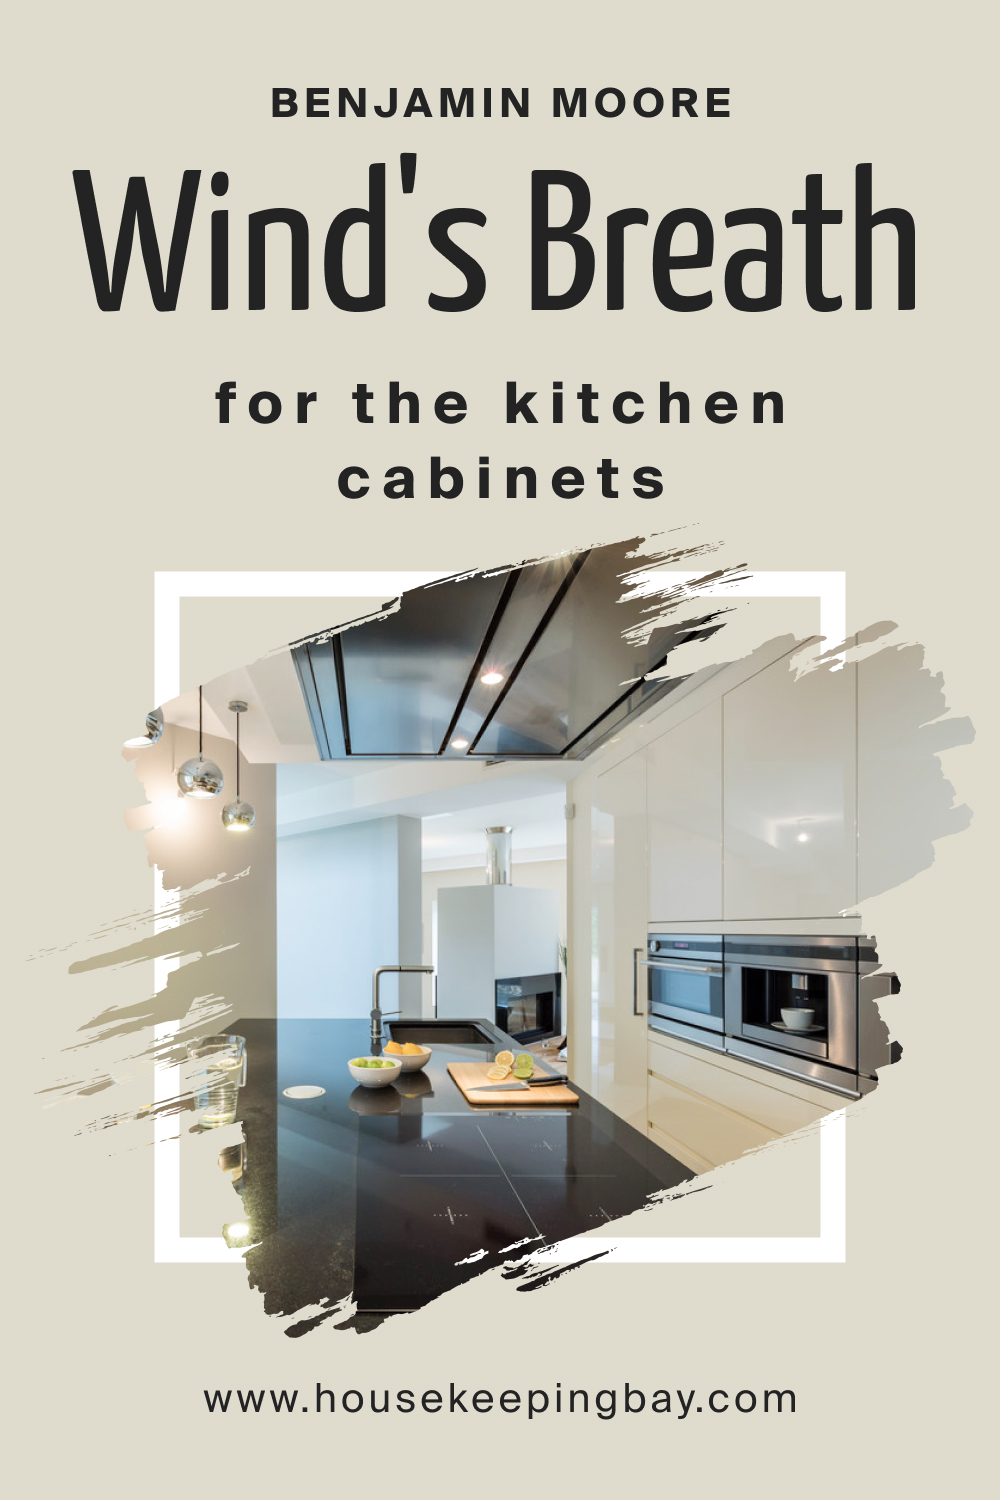 How to Use BM Wind's Breath 981 on Kitchen Cabinets?